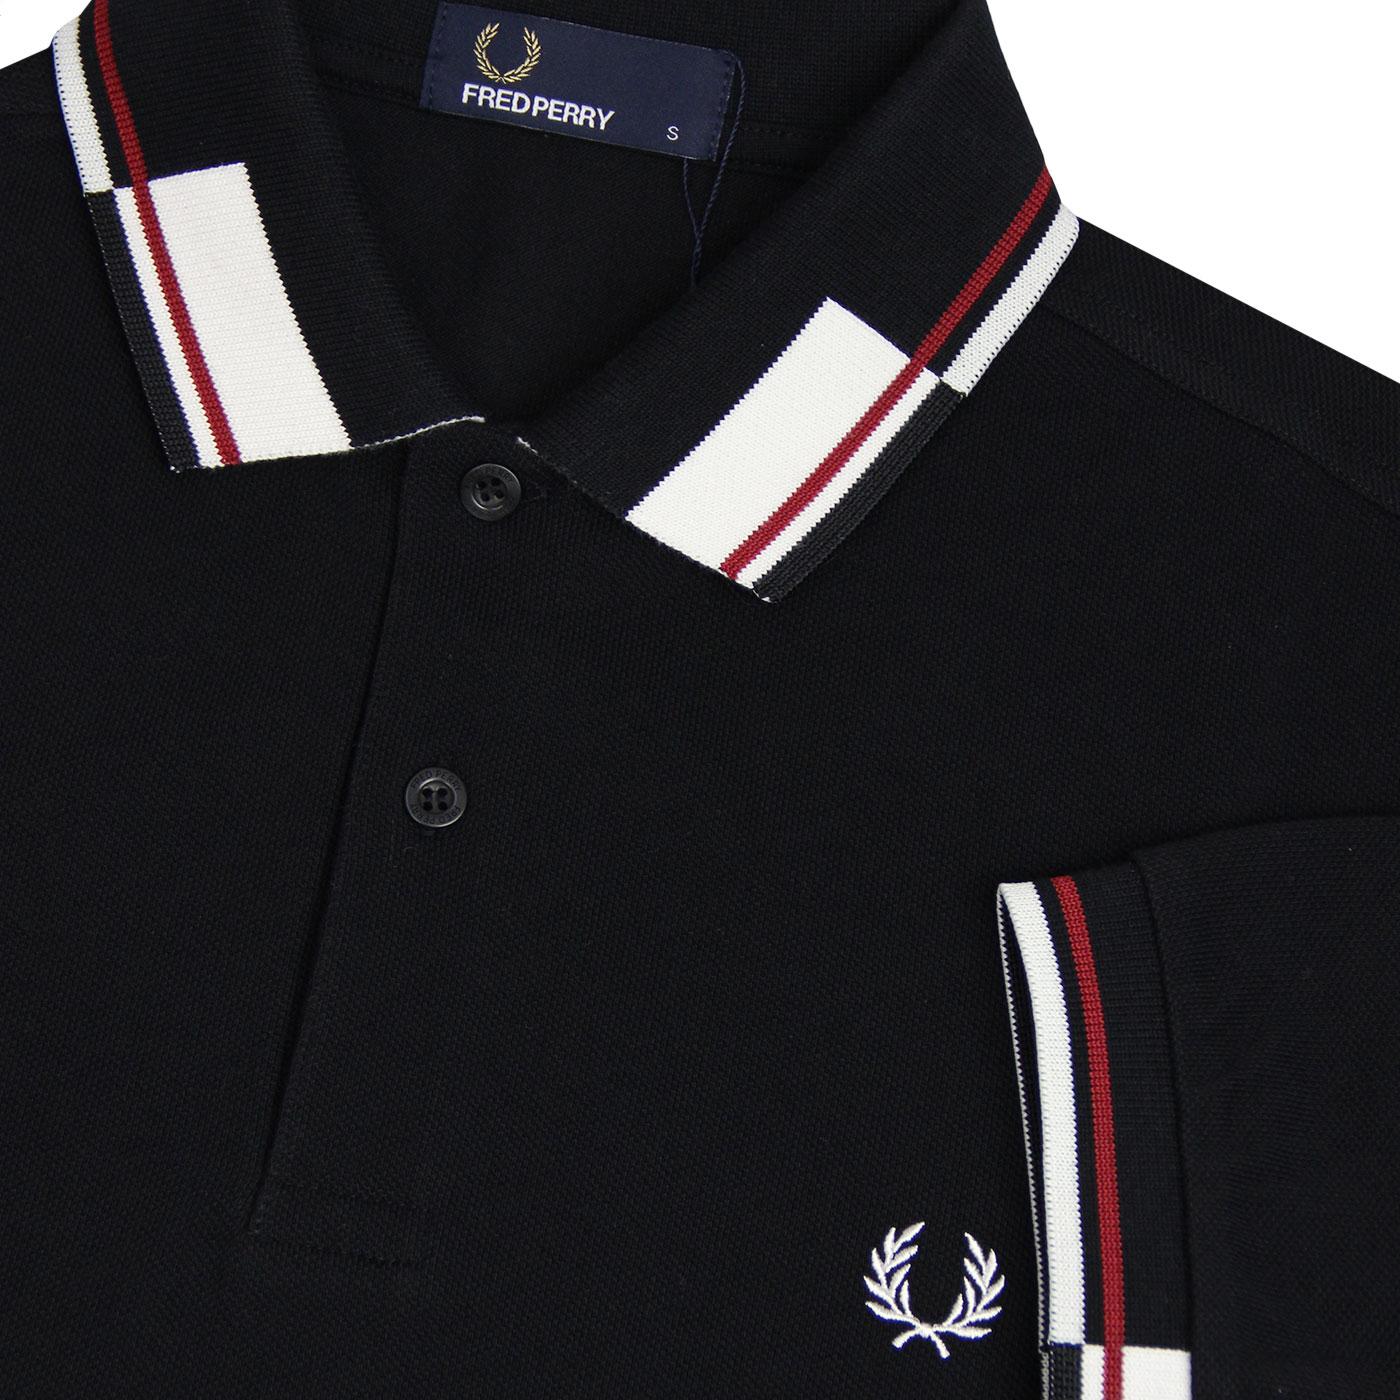 FRED PERRY M650s Retro Mod Abstract Collar Polo Top Black